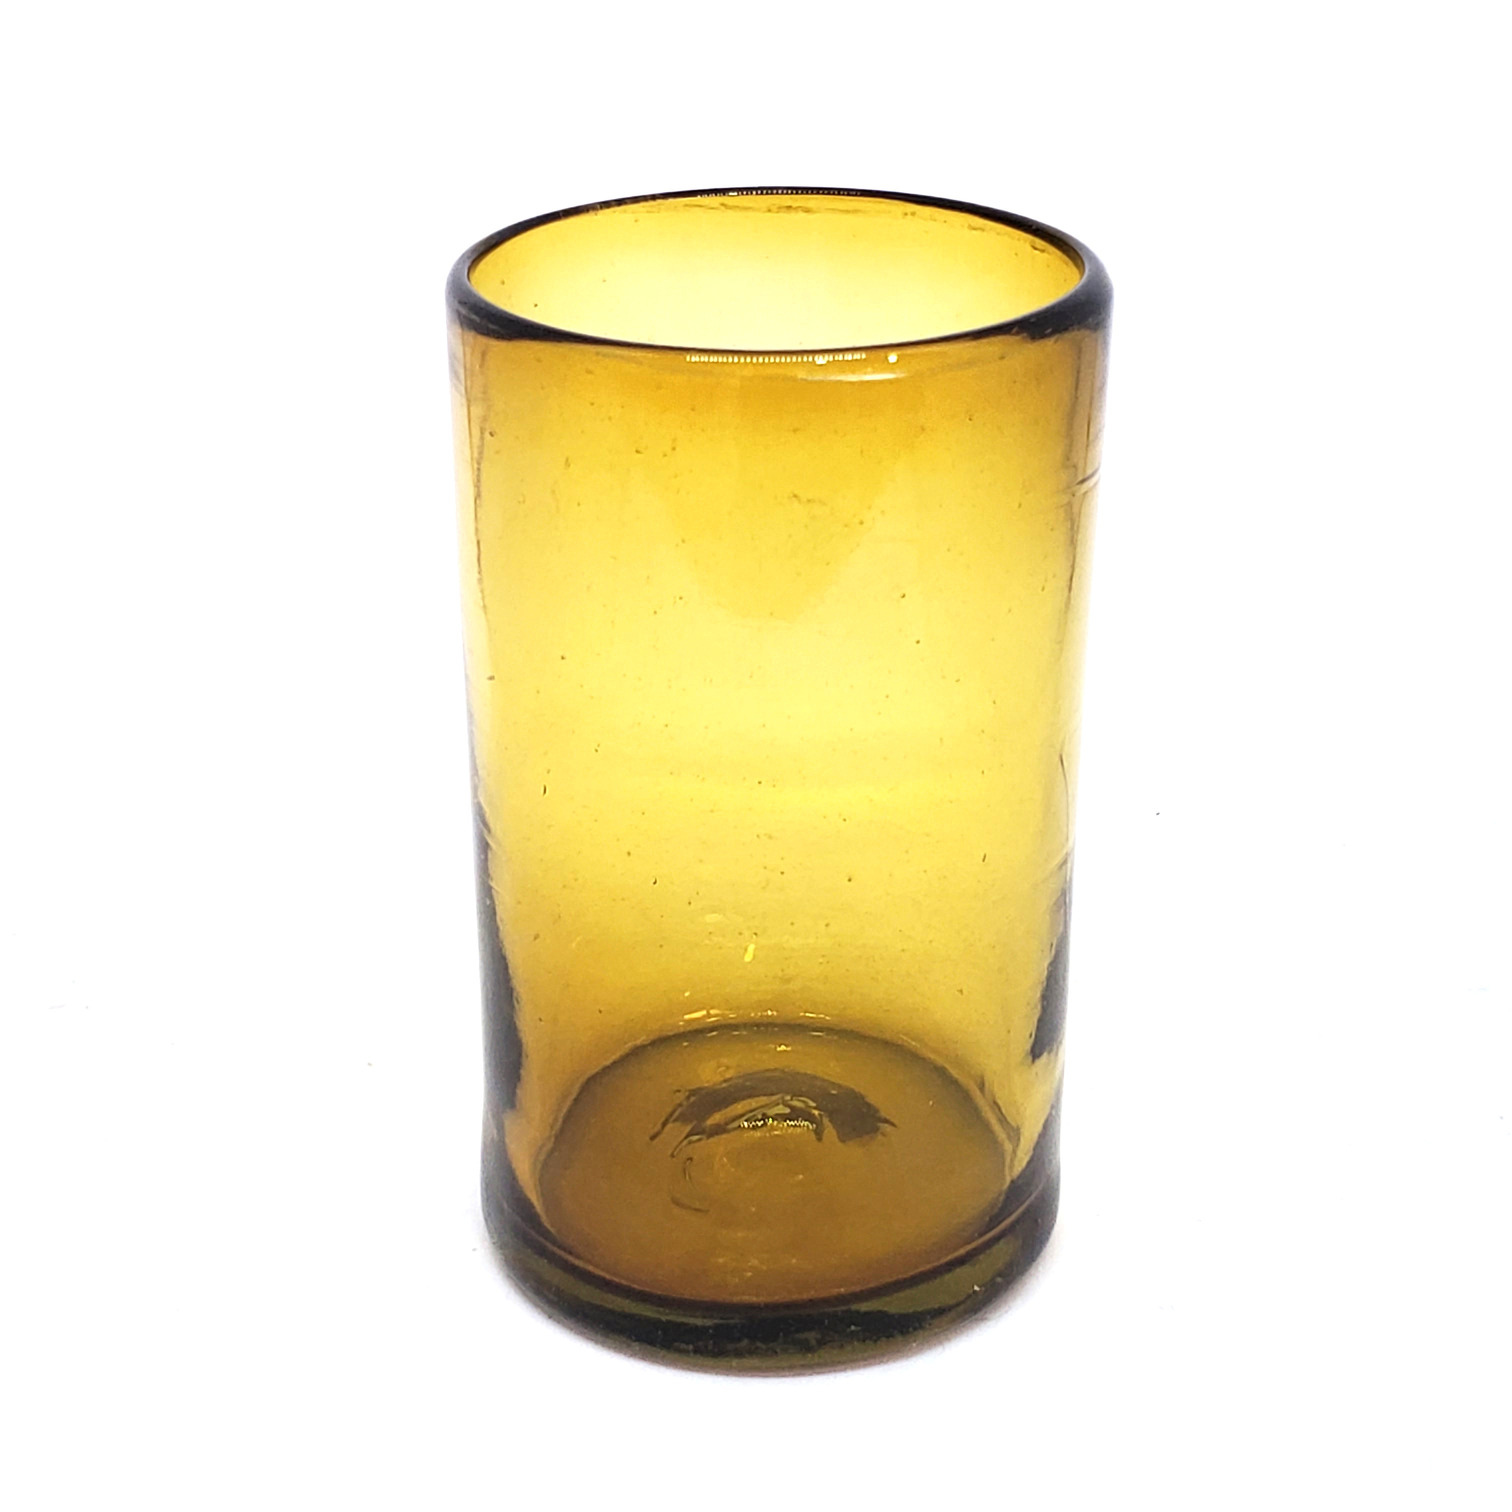 Sale Items / Solid Amber 14 oz Drinking Glasses (set of 6) / These handcrafted glasses deliver a classic touch to your favorite drink.